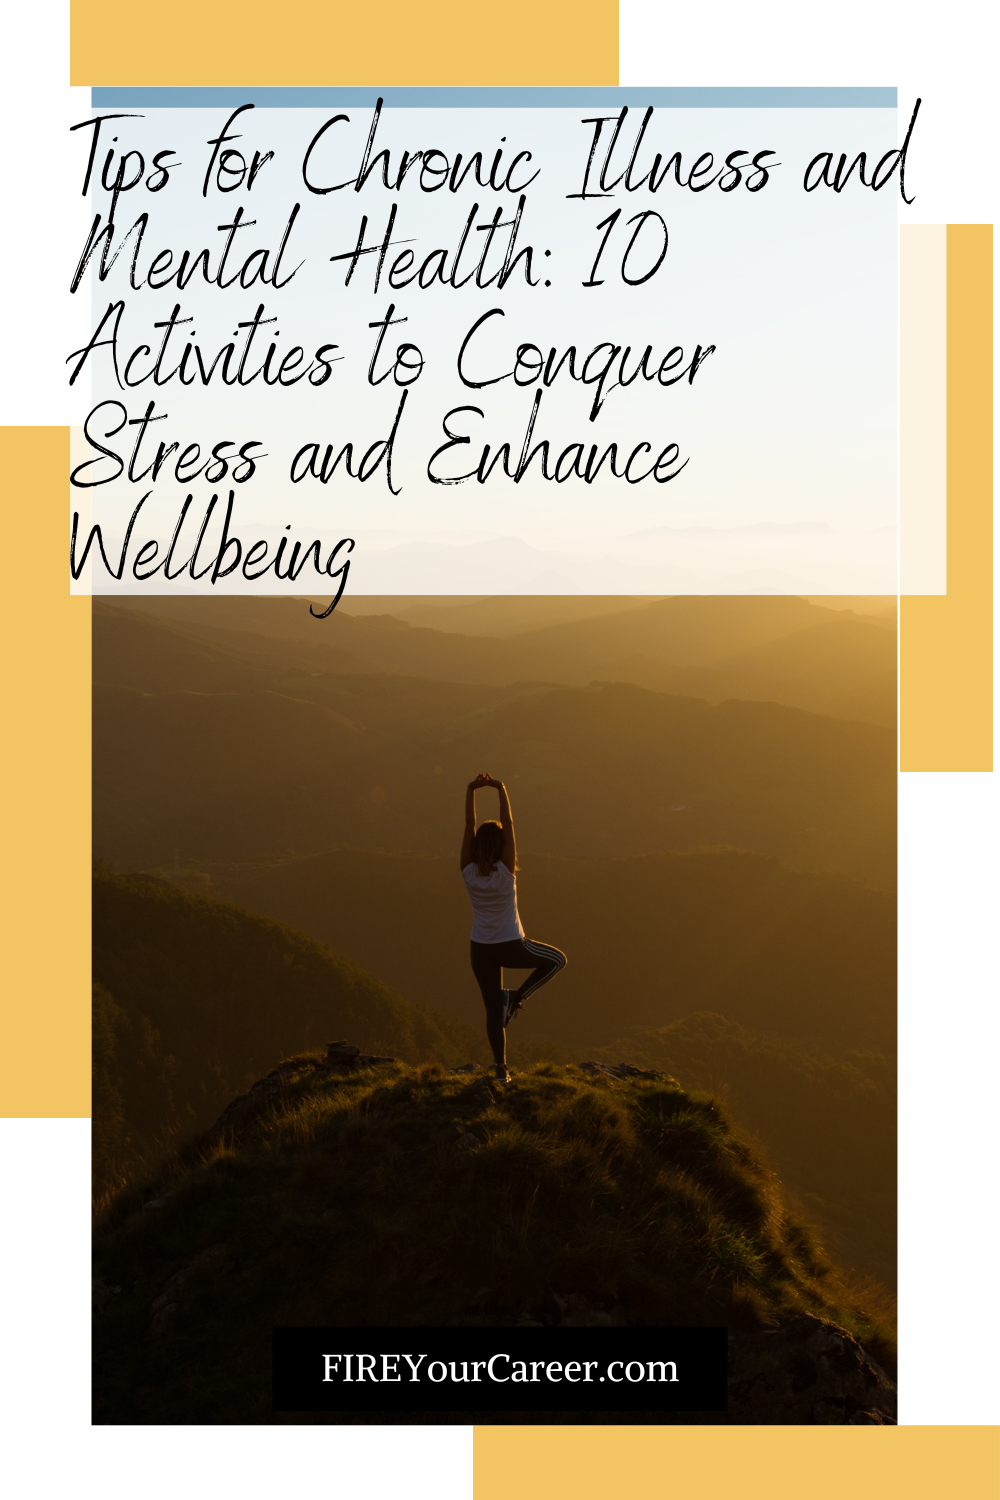 Tips for Chronic Illness and Mental Health 10 Activities to Conquer Stress and Enhance Wellbeing Pinterest